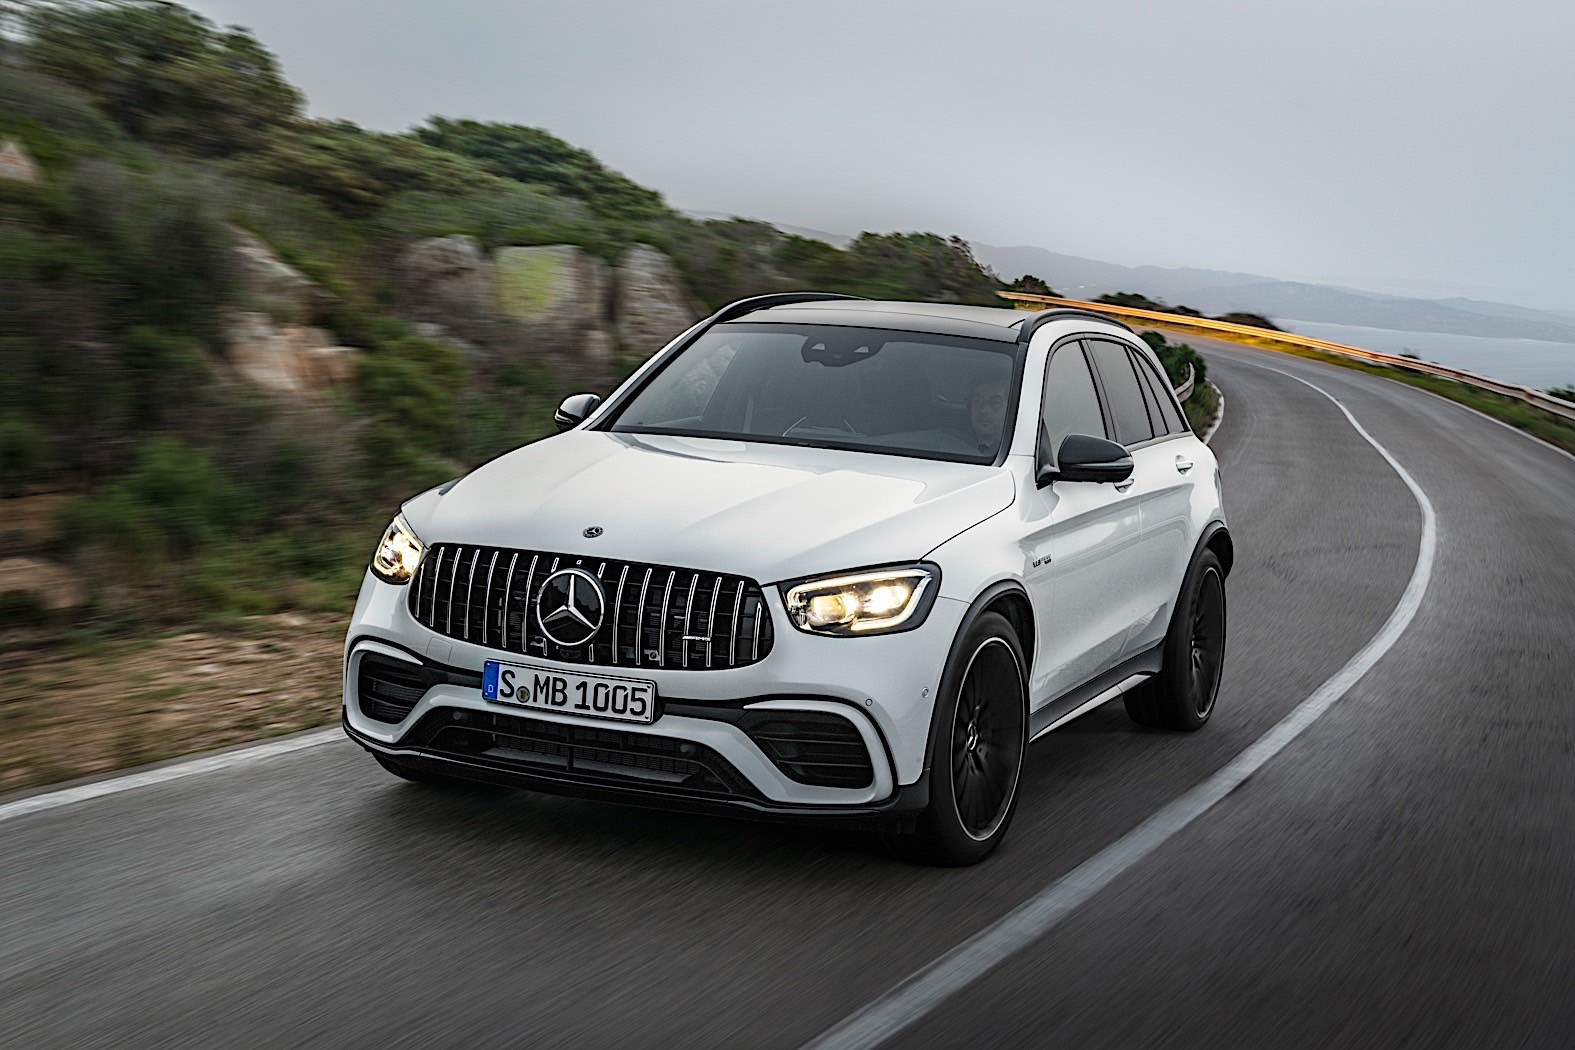 Introduced in 2020, the glb features some of the . 2020 Mercedes-AMG GLC 63 Breaks Cover With Minor Tweaks